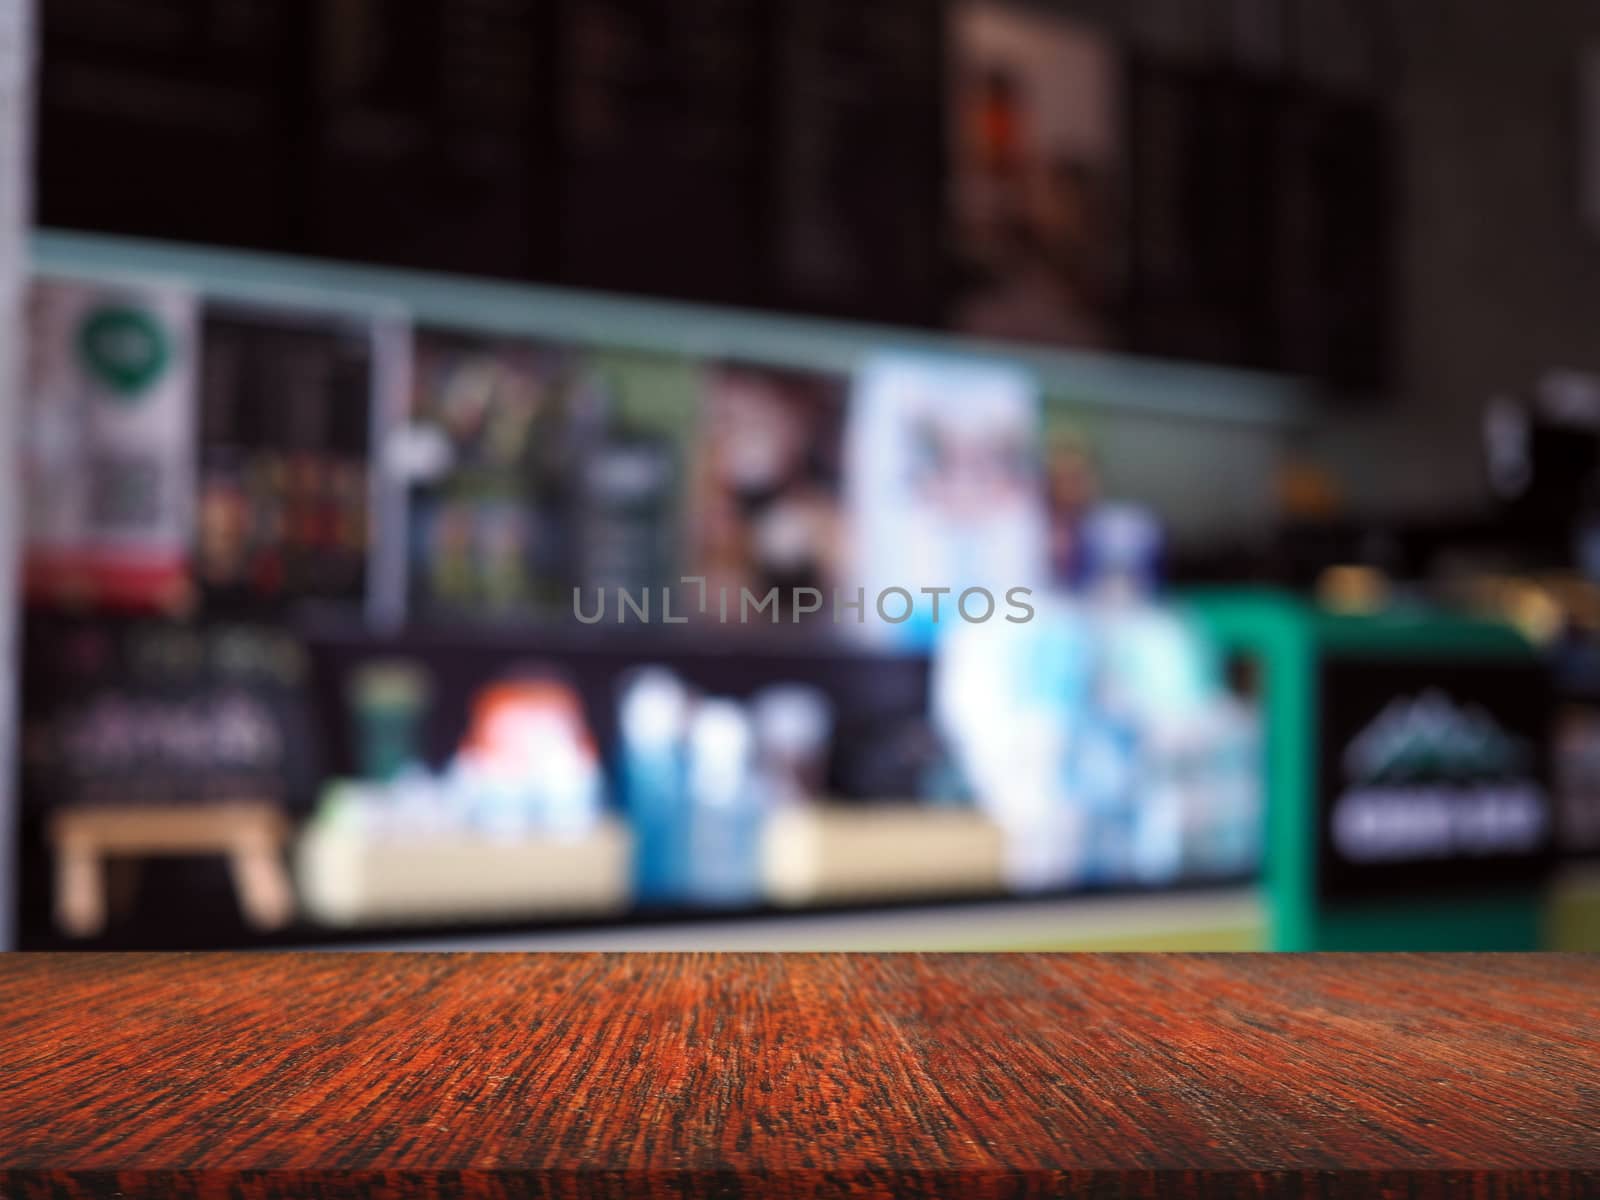 Product display with blank wood panels In a coffee shop with a blurred background. Suitable for showing your products on blank space. display mockup concept.